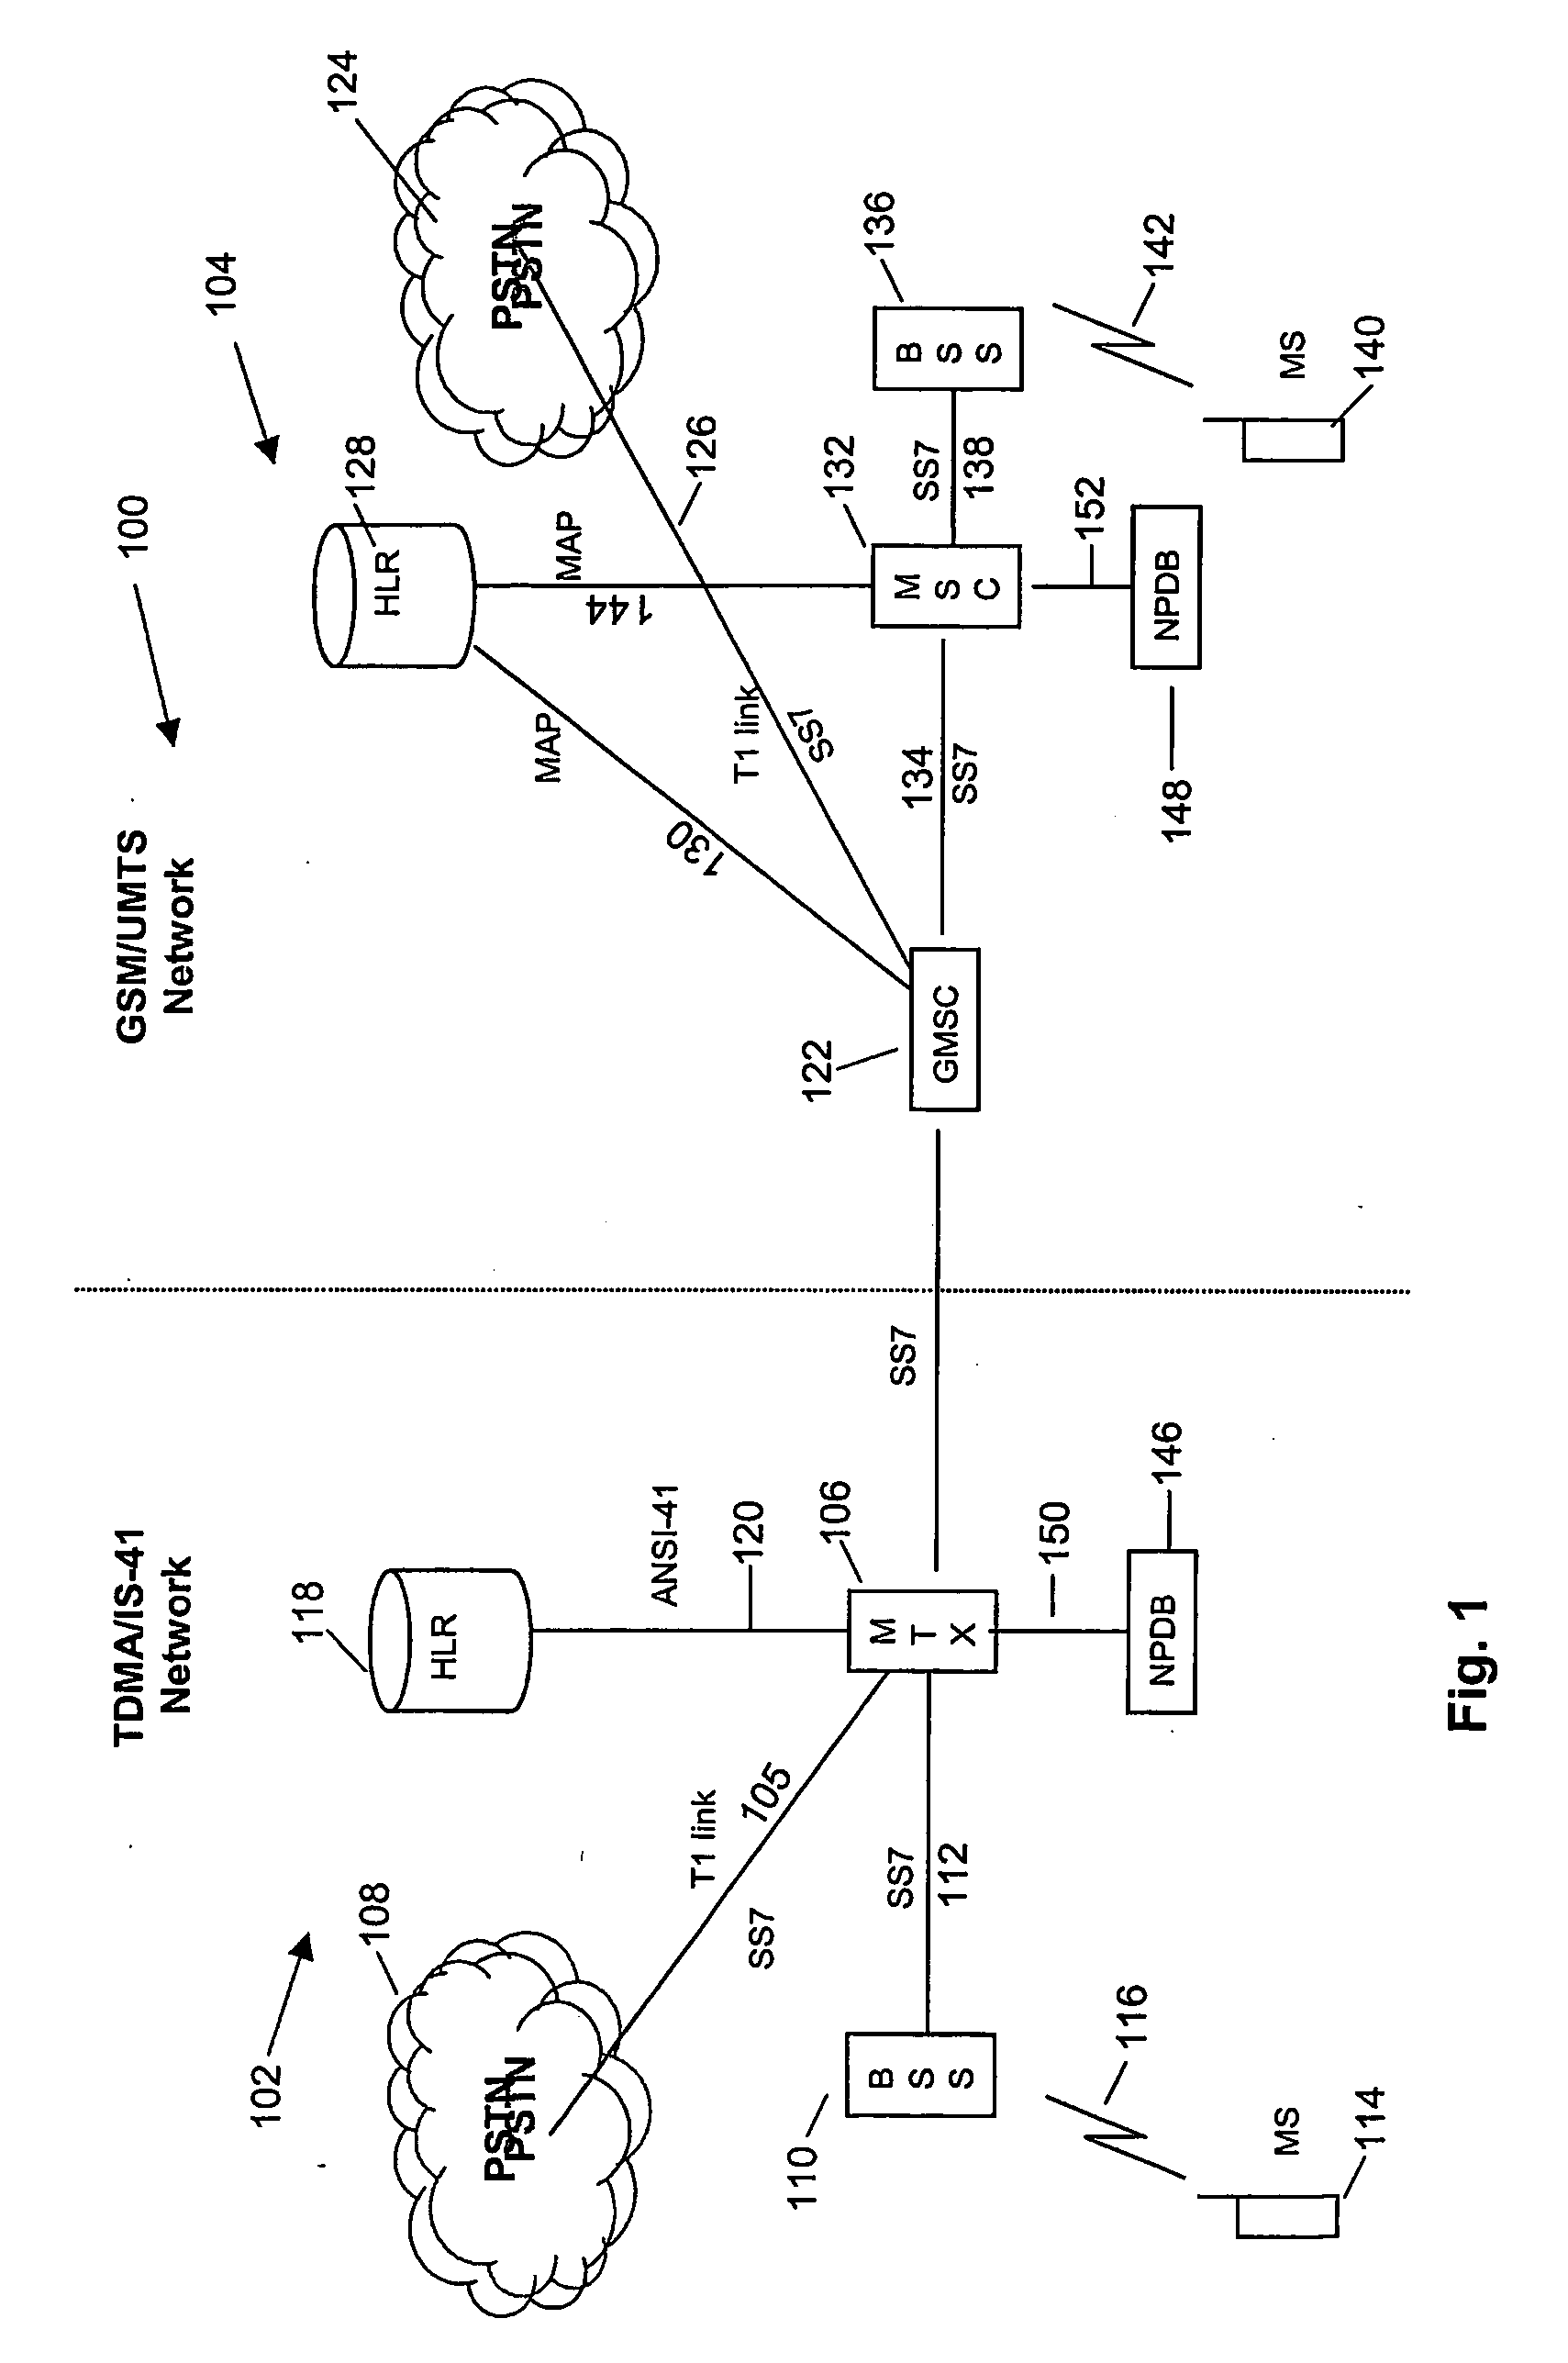 Method and system for providing mobile number portability between different wireless networks of different technologies